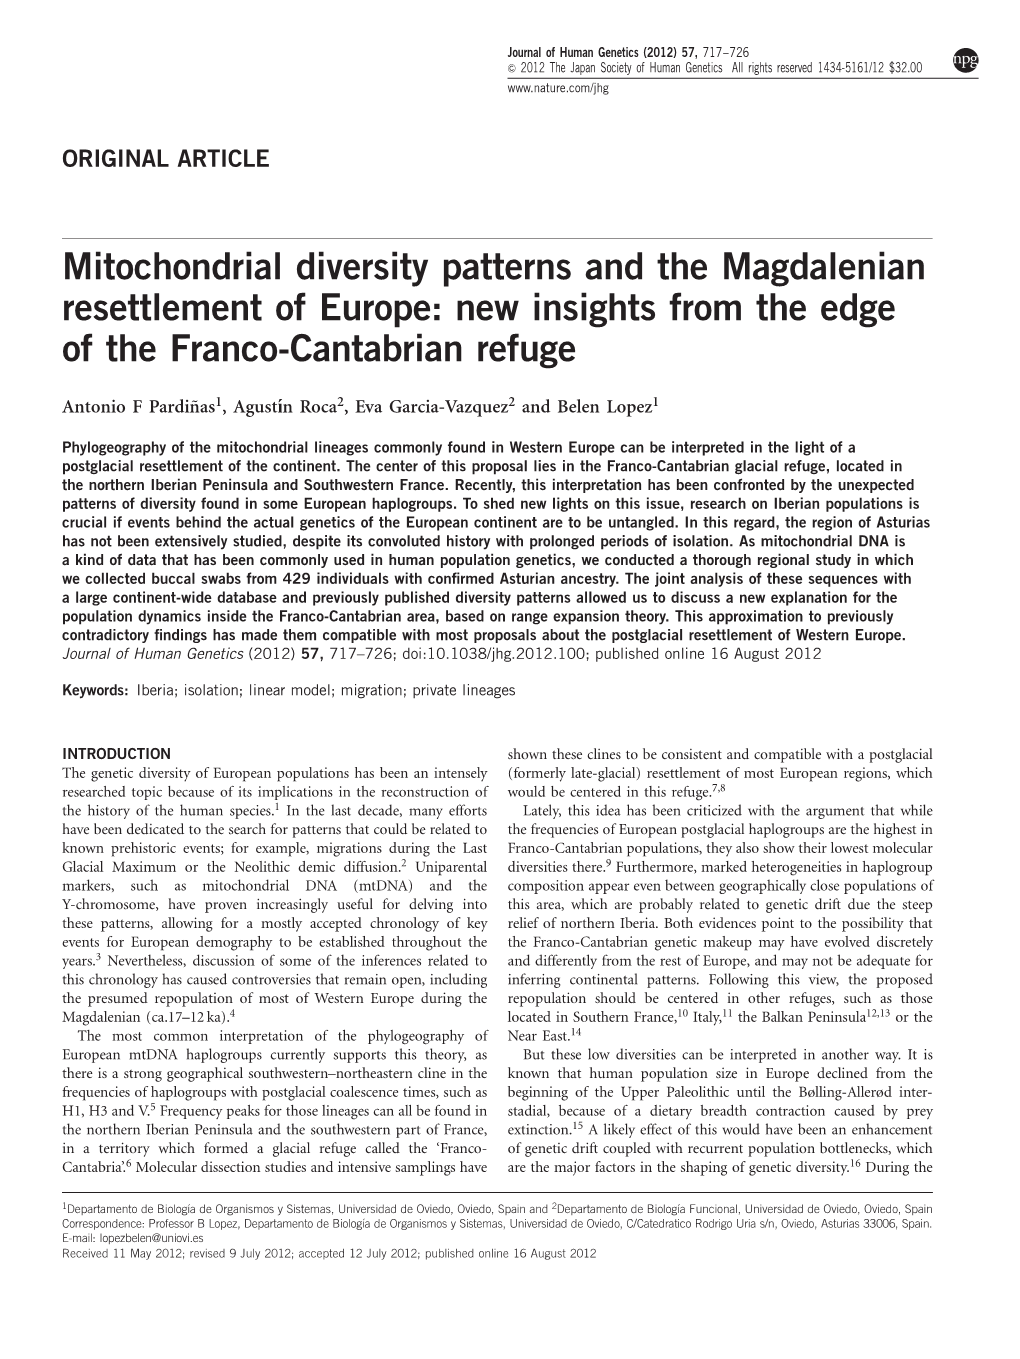 Mitochondrial Diversity Patterns and the Magdalenian Resettlement of Europe: New Insights from the Edge of the Franco-Cantabrian Refuge